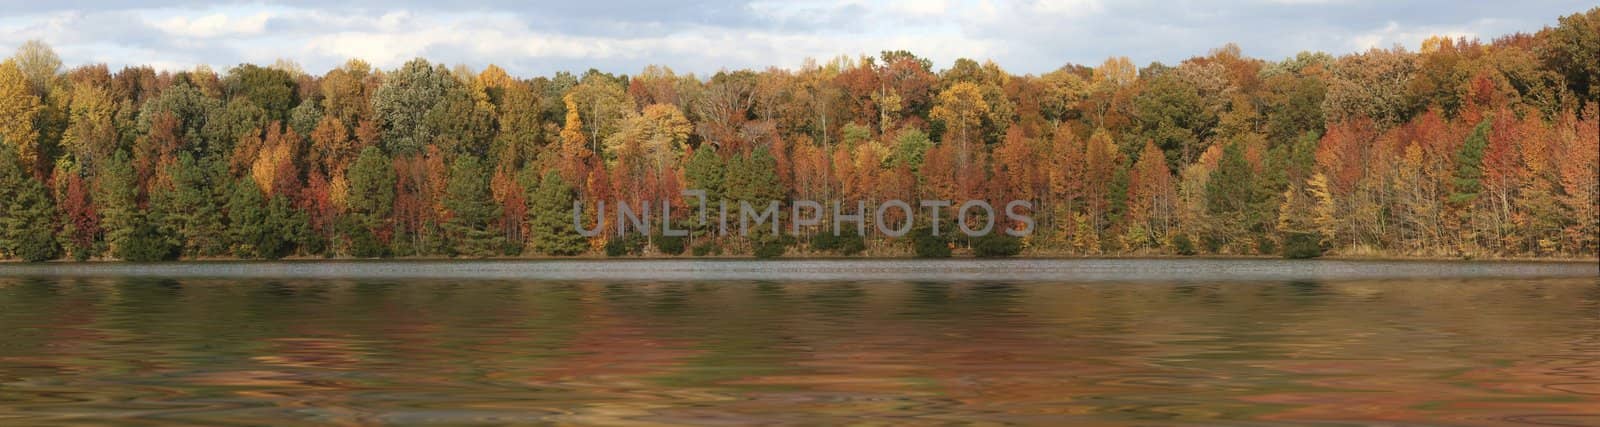 panorama in fall by gjdisplay